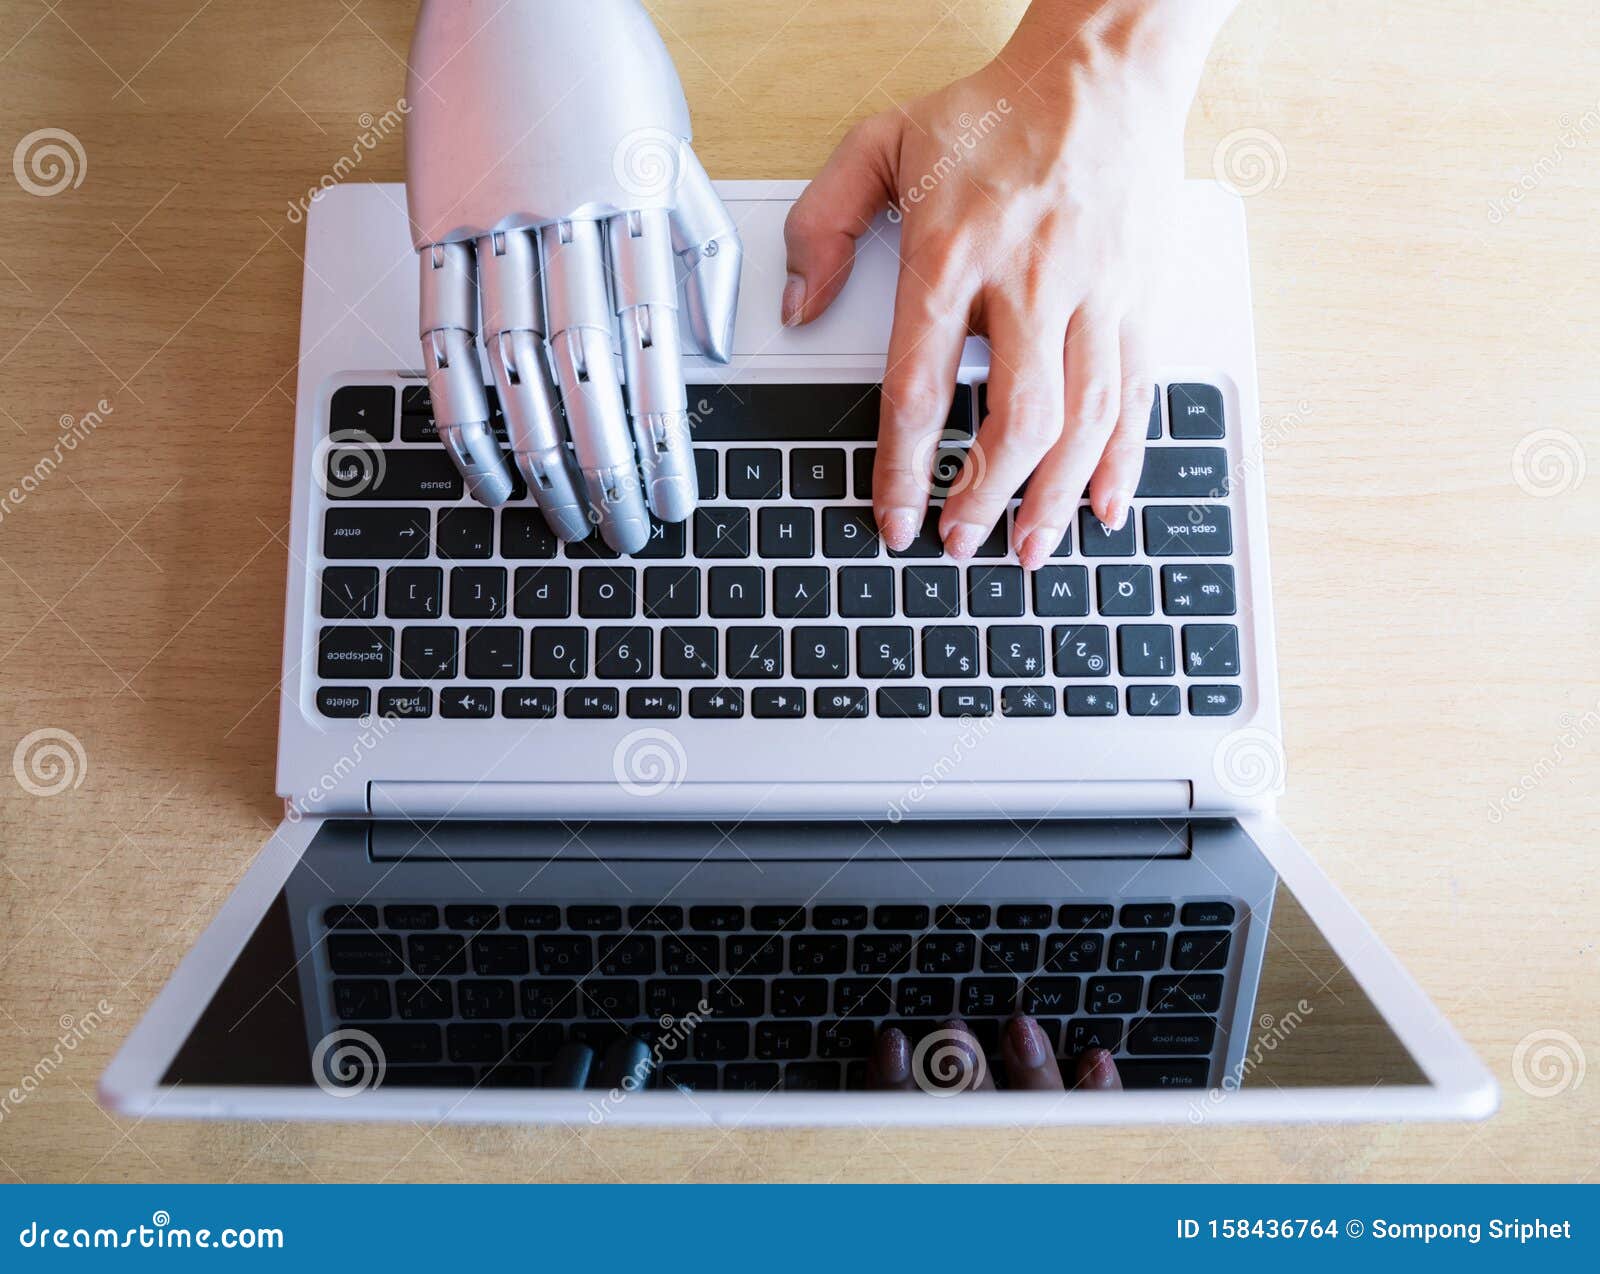 robot hands and fingers point to laptop button advisor chatbot robotic artificial intelligence